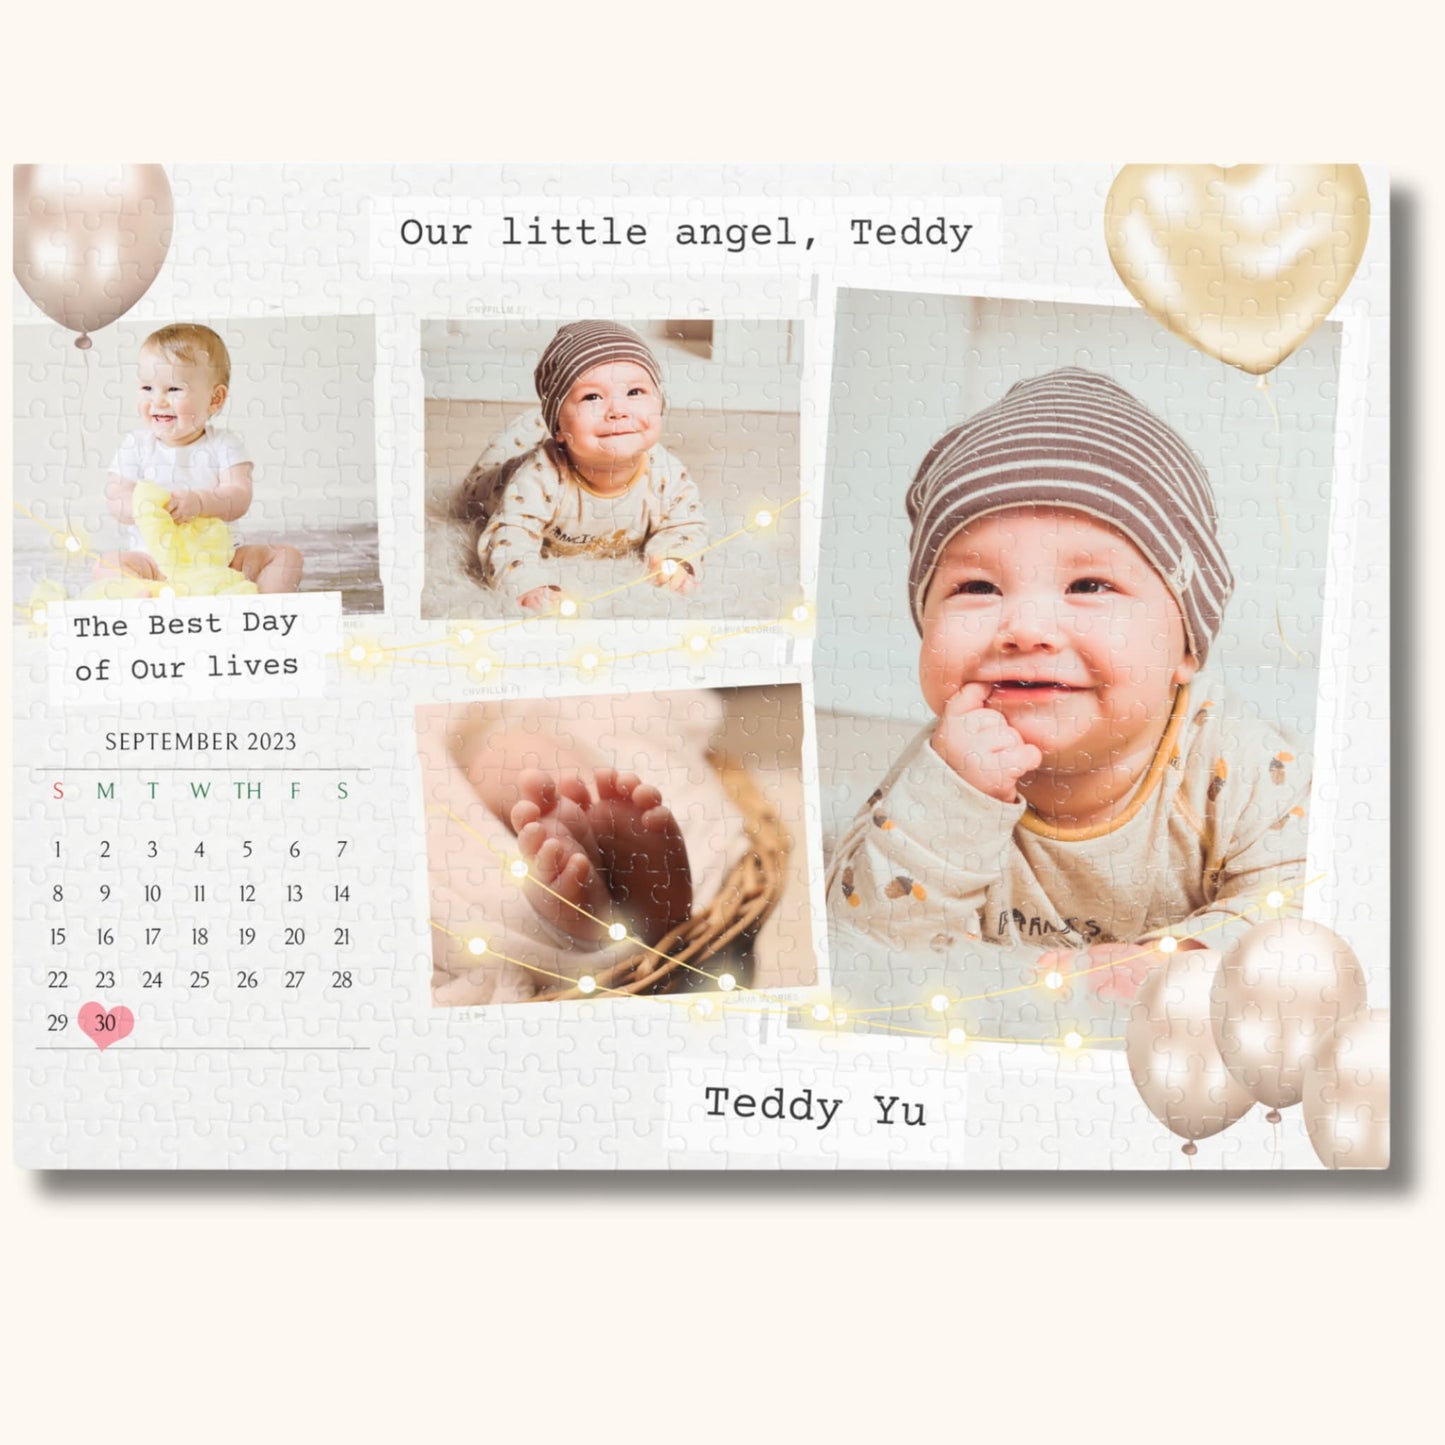 500 pieces of a custom newborn jigsaw puzzle on a beige background.